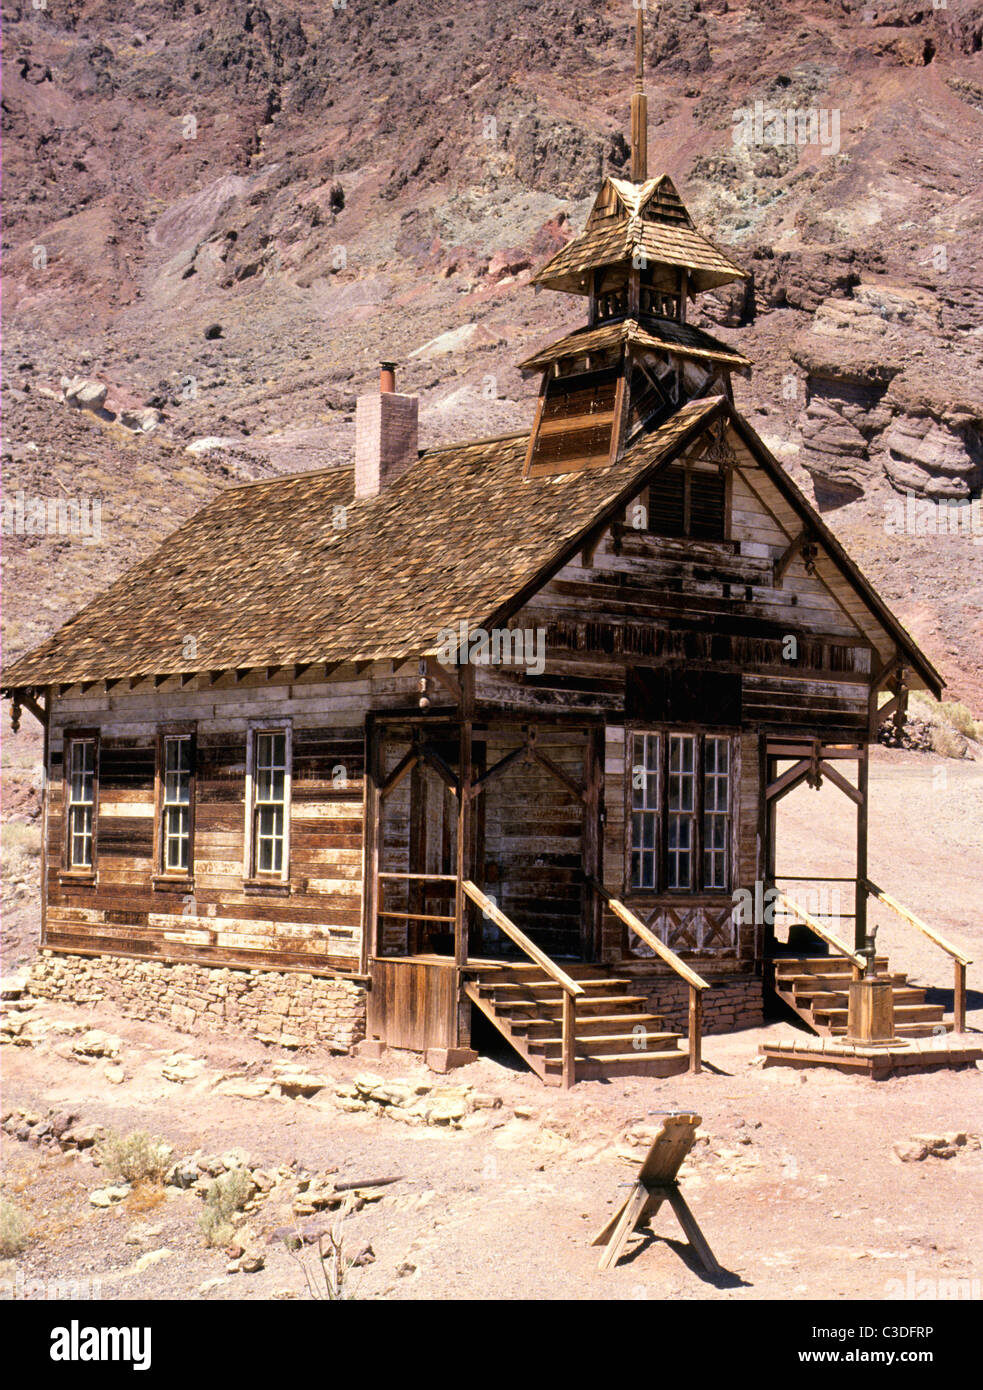 The old schoolhouse in the ghost town of Calico deep in the California desert Stock Photo